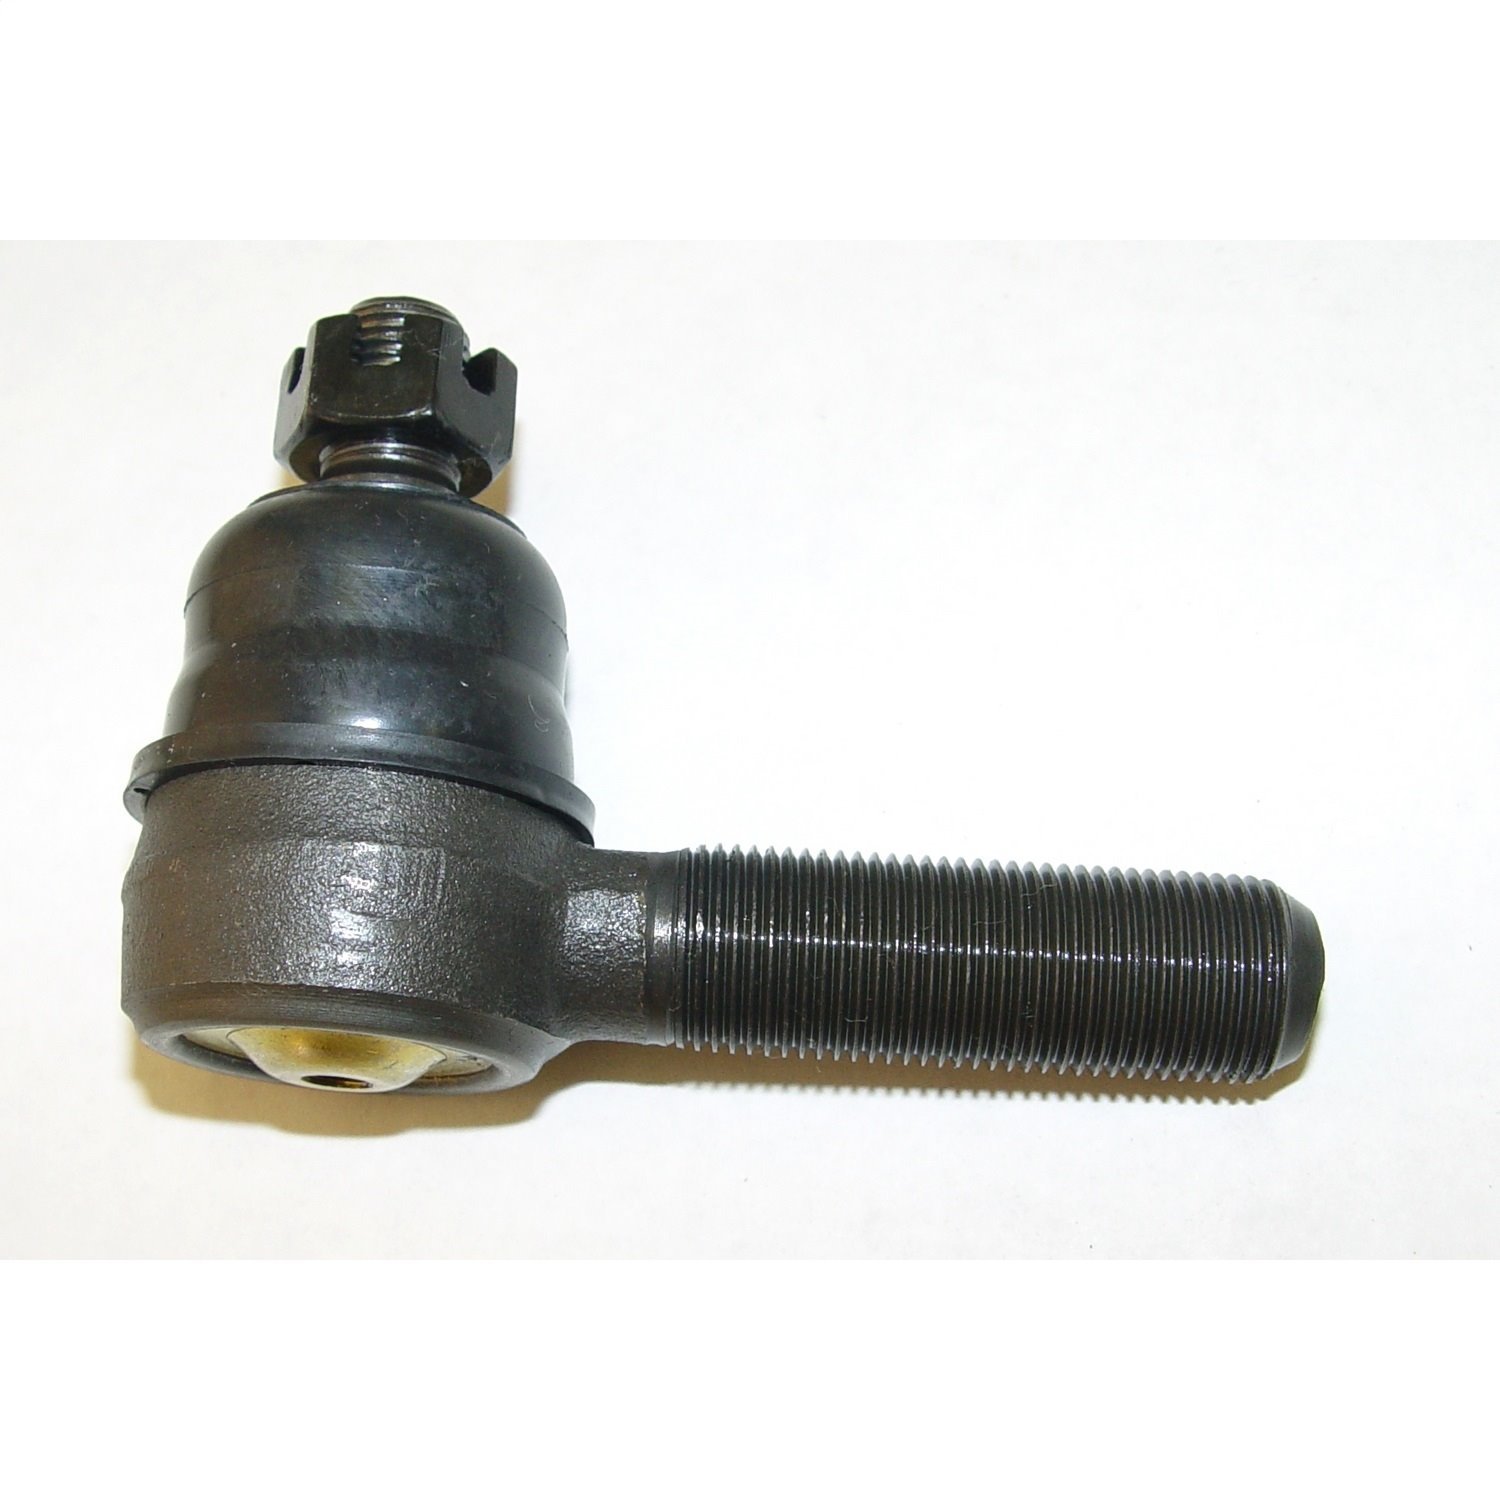 OE-style replacement tie rod end with right hand